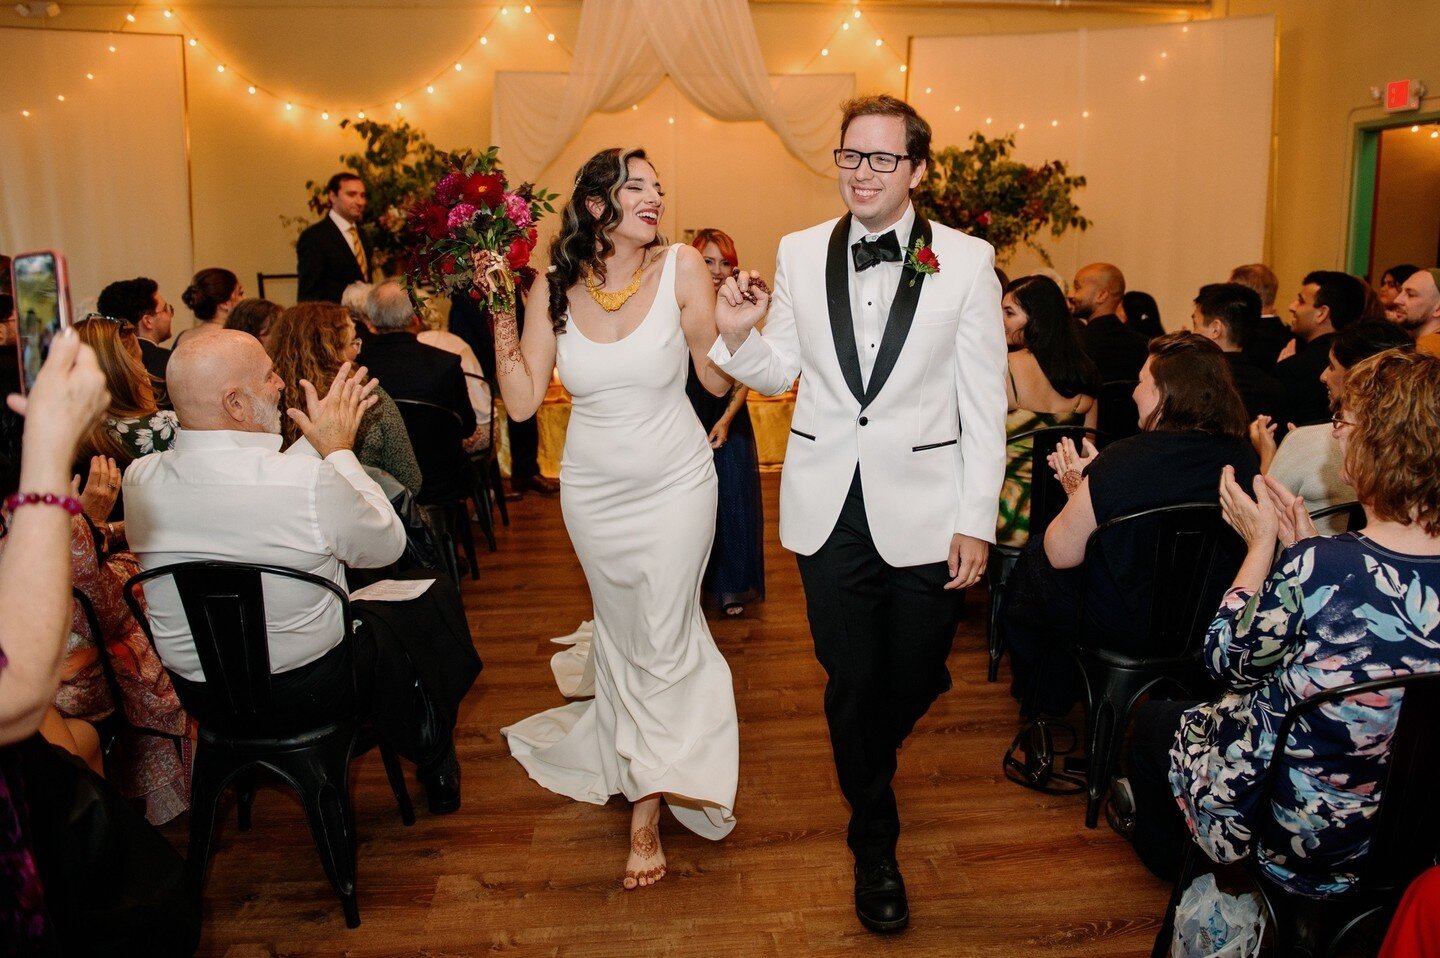 This. This is yours and our favorite moment! Complete and unabashed HAPPINESS! Cheers to Aleicia &amp; Adam on that September night!⁠
⁠
@loveandlightstudiopa⁠
⁠
⁠
#nepawedding #nepaweddings #paweddings #weddingvenuepa ⁠
#weddingvenues #rusticweddingv